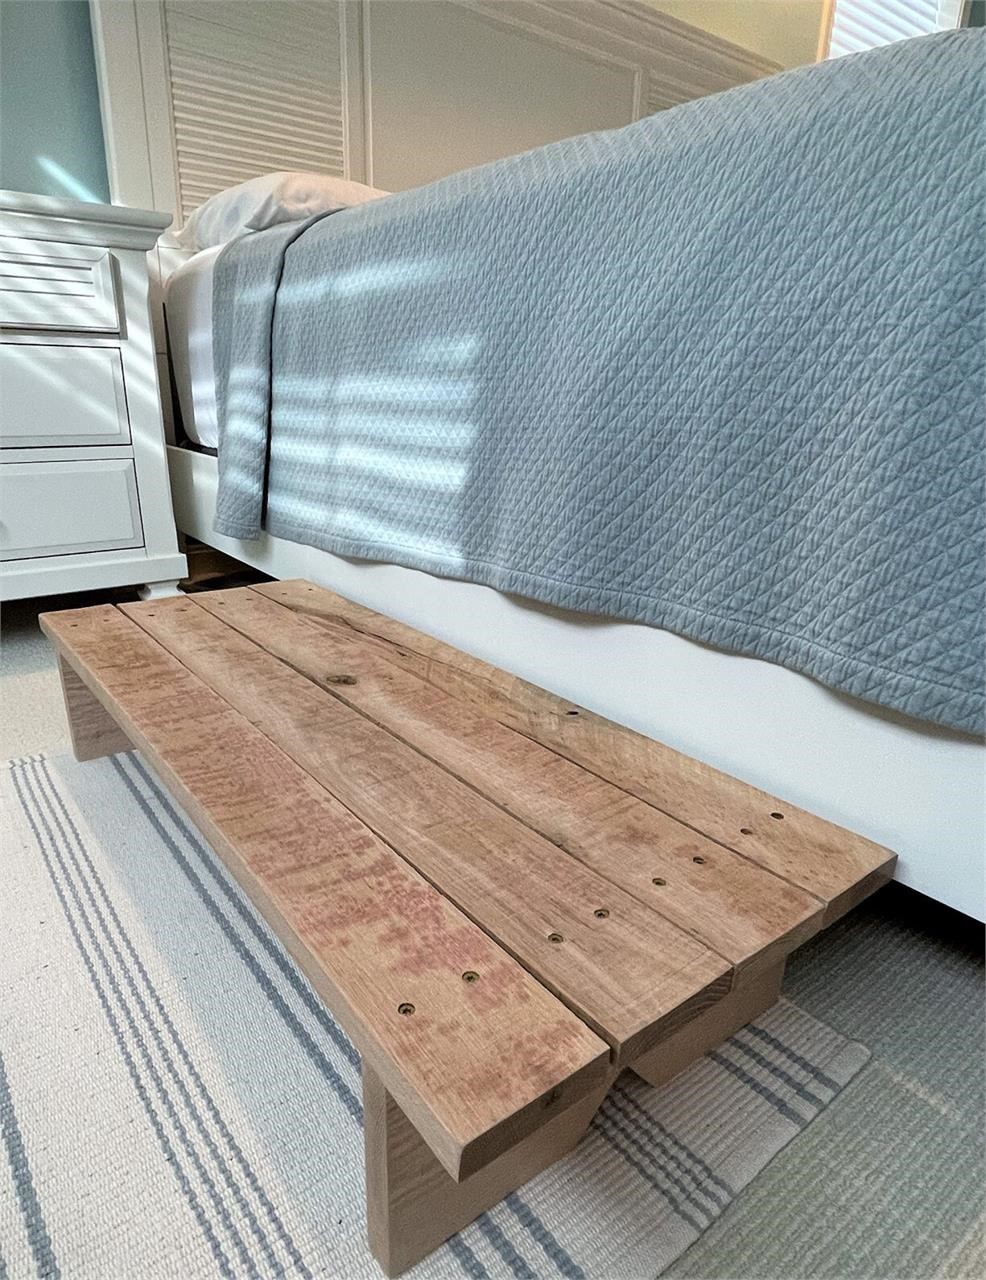 Classic Amish Reclaimed Wood Deck/Spa Step, Patio